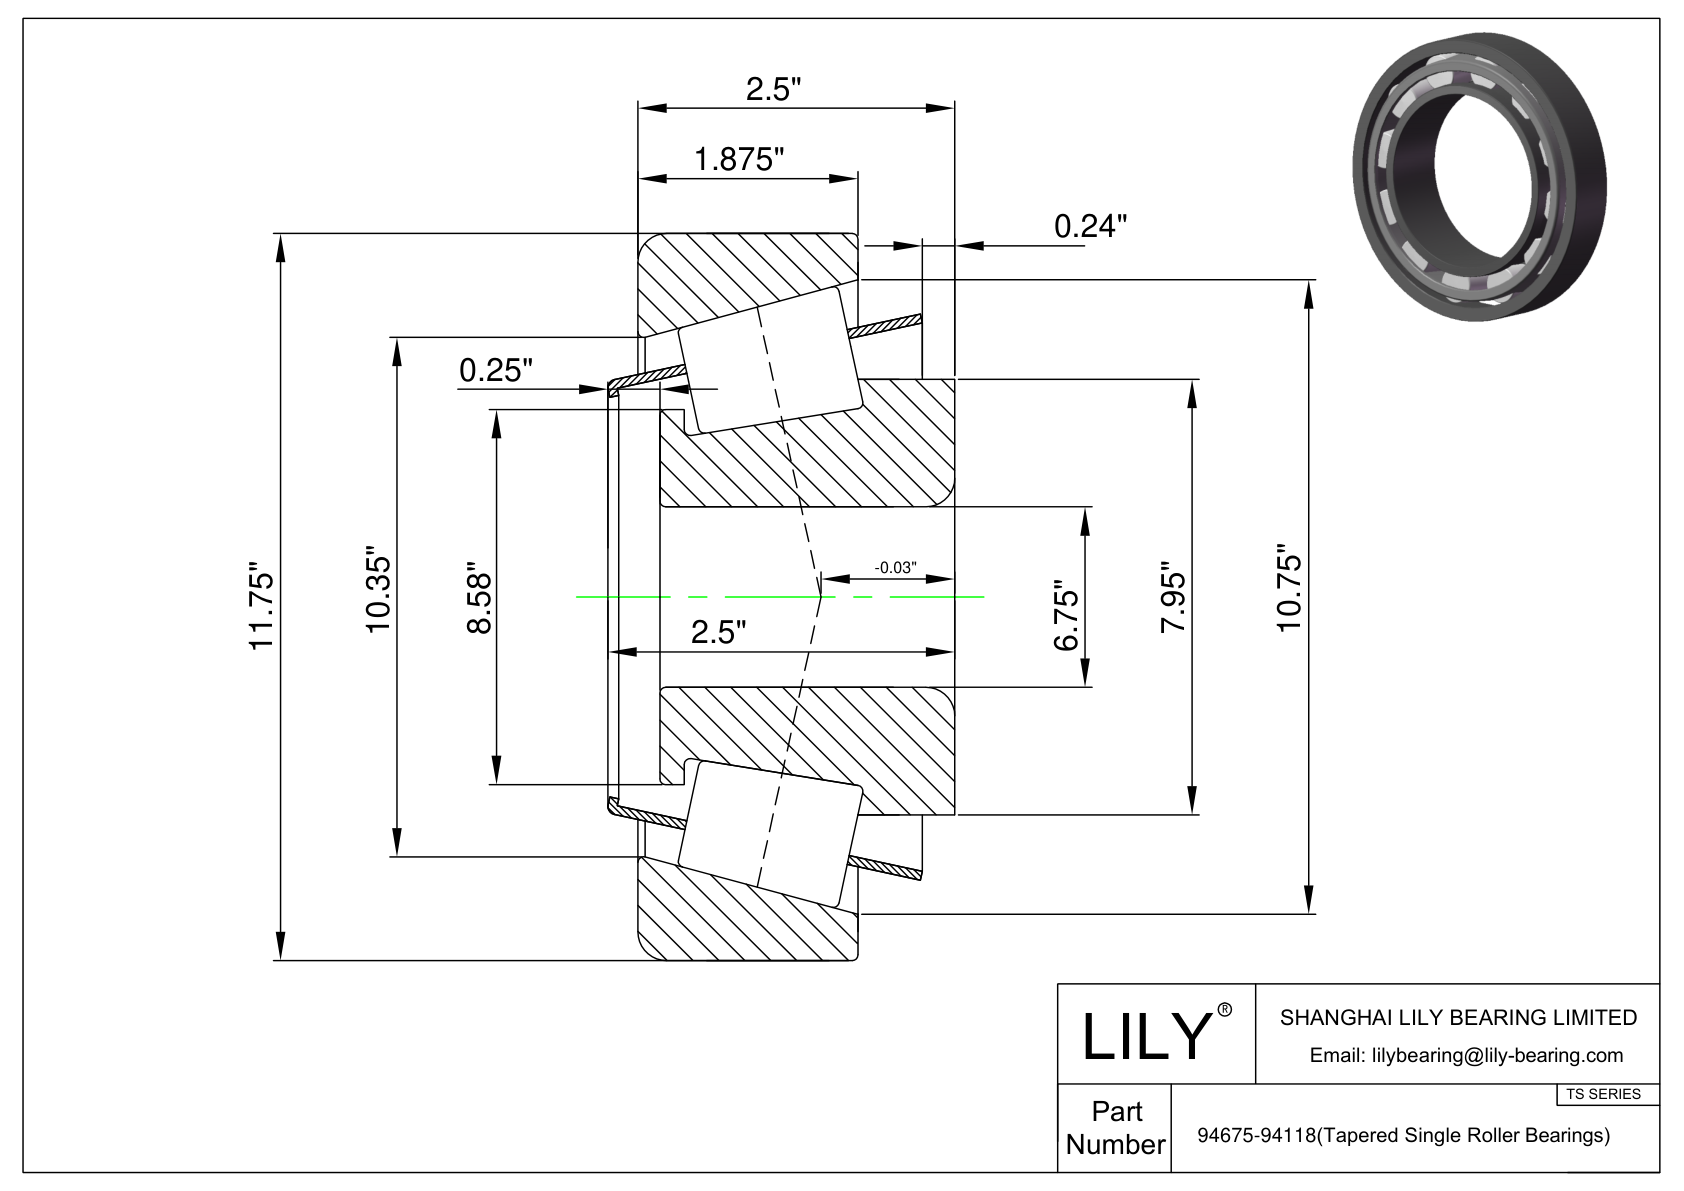 94675-94118 TS (Tapered Single Roller Bearings) (Imperial) cad drawing